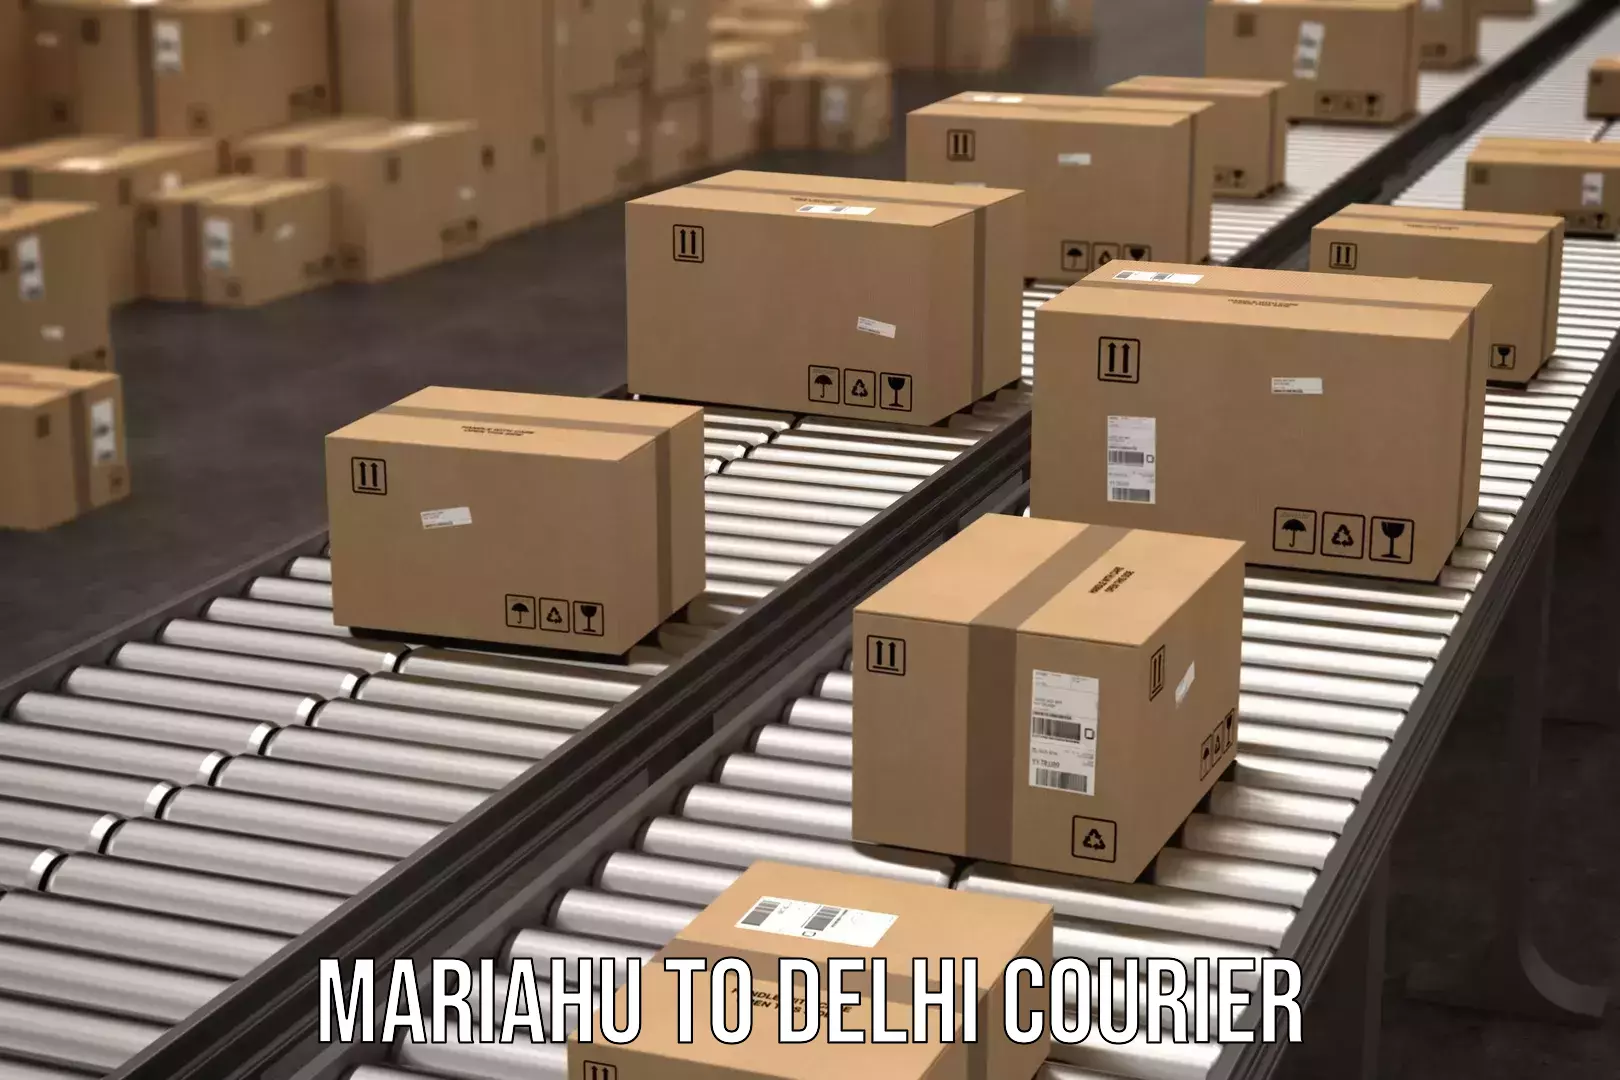 On-call courier service Mariahu to Delhi